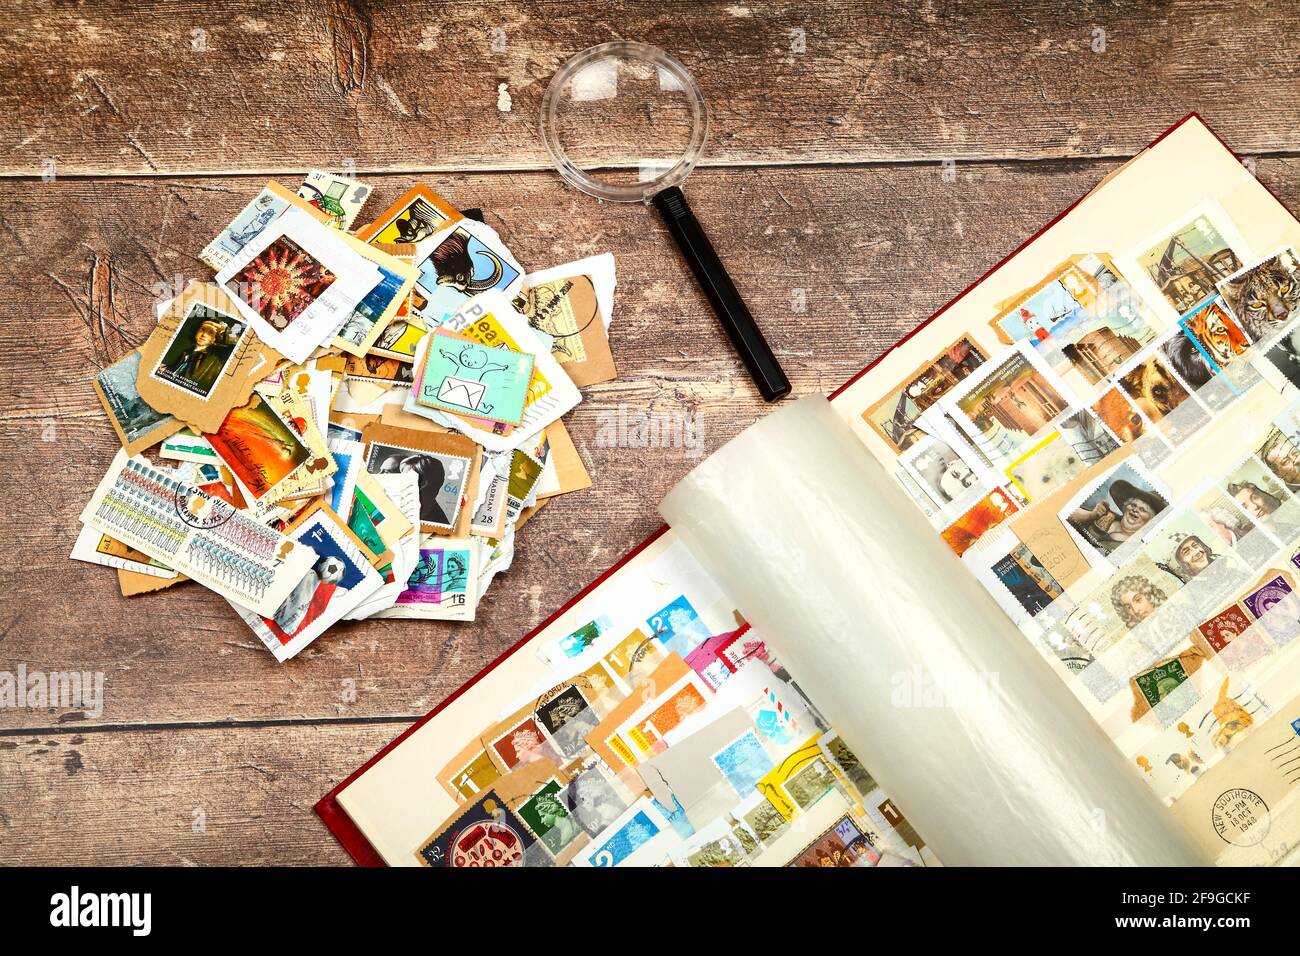 Stamp album full of used British postage stamps laid on a rustic wooden table top Stock Photo